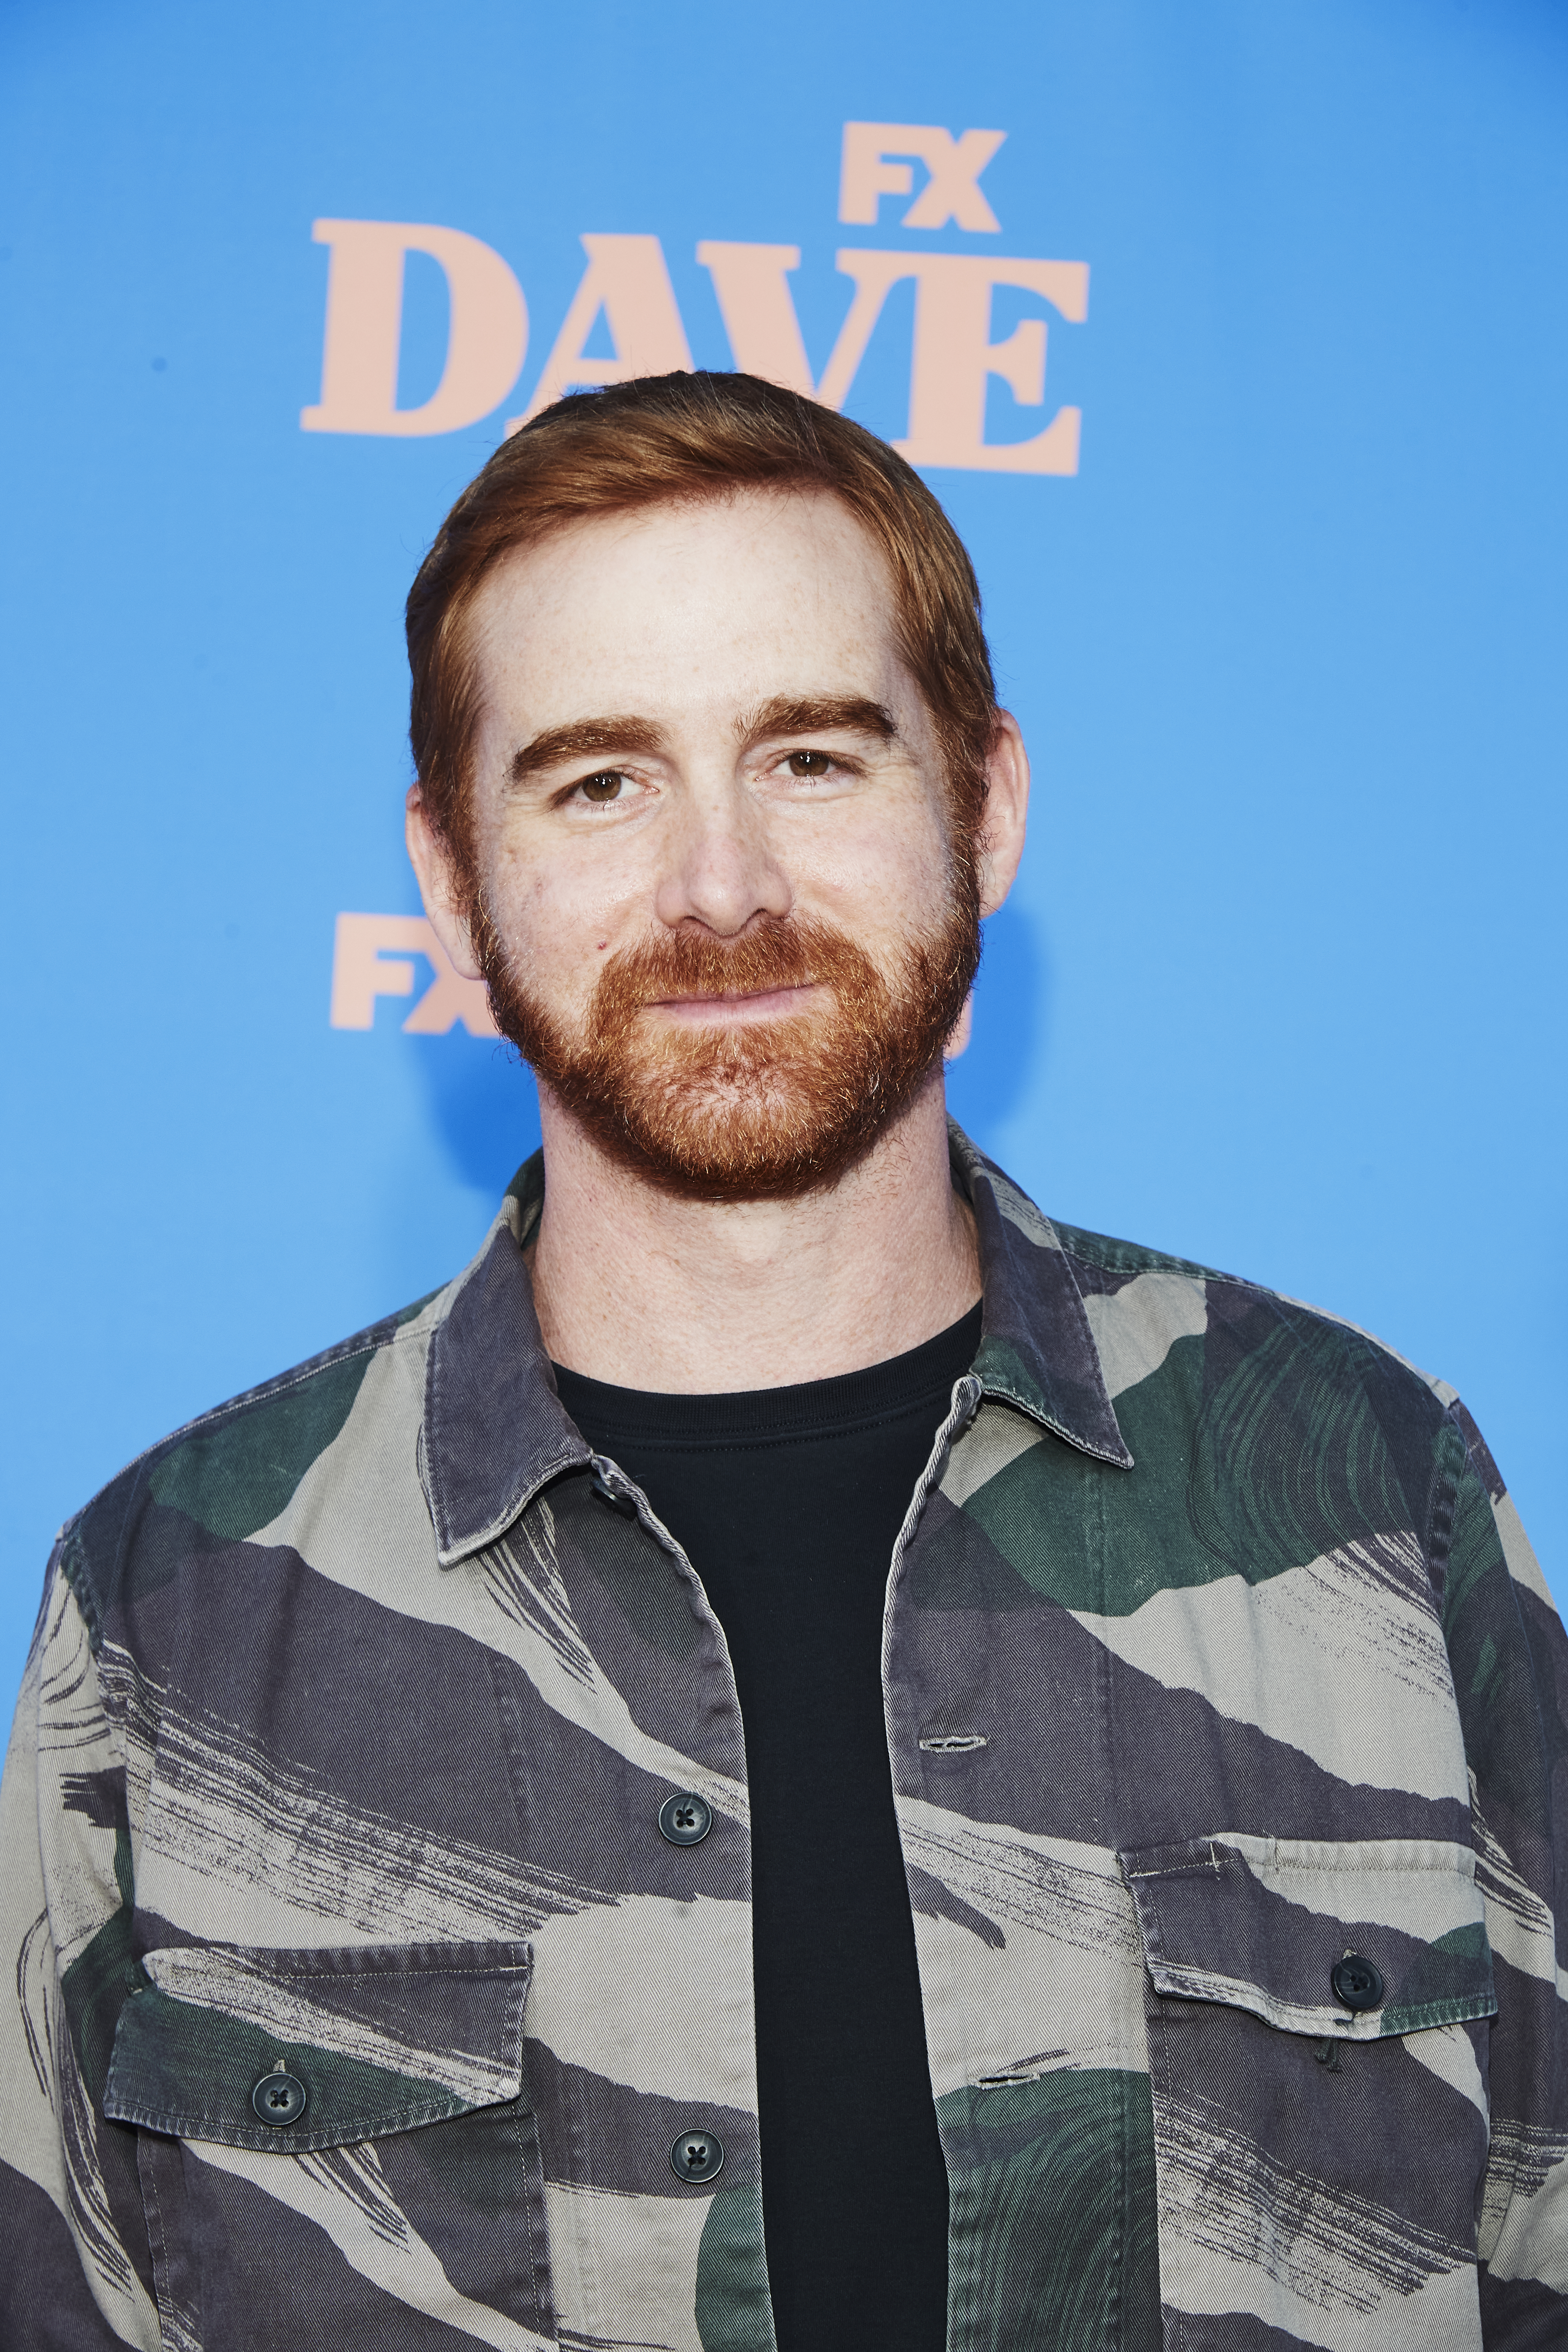 Actor Andrew Santino arrives at the premiere of FXX’s "Dave" at The Greek Theatre on June 10, 2021 in Los Angeles, California | Source: Getty Images